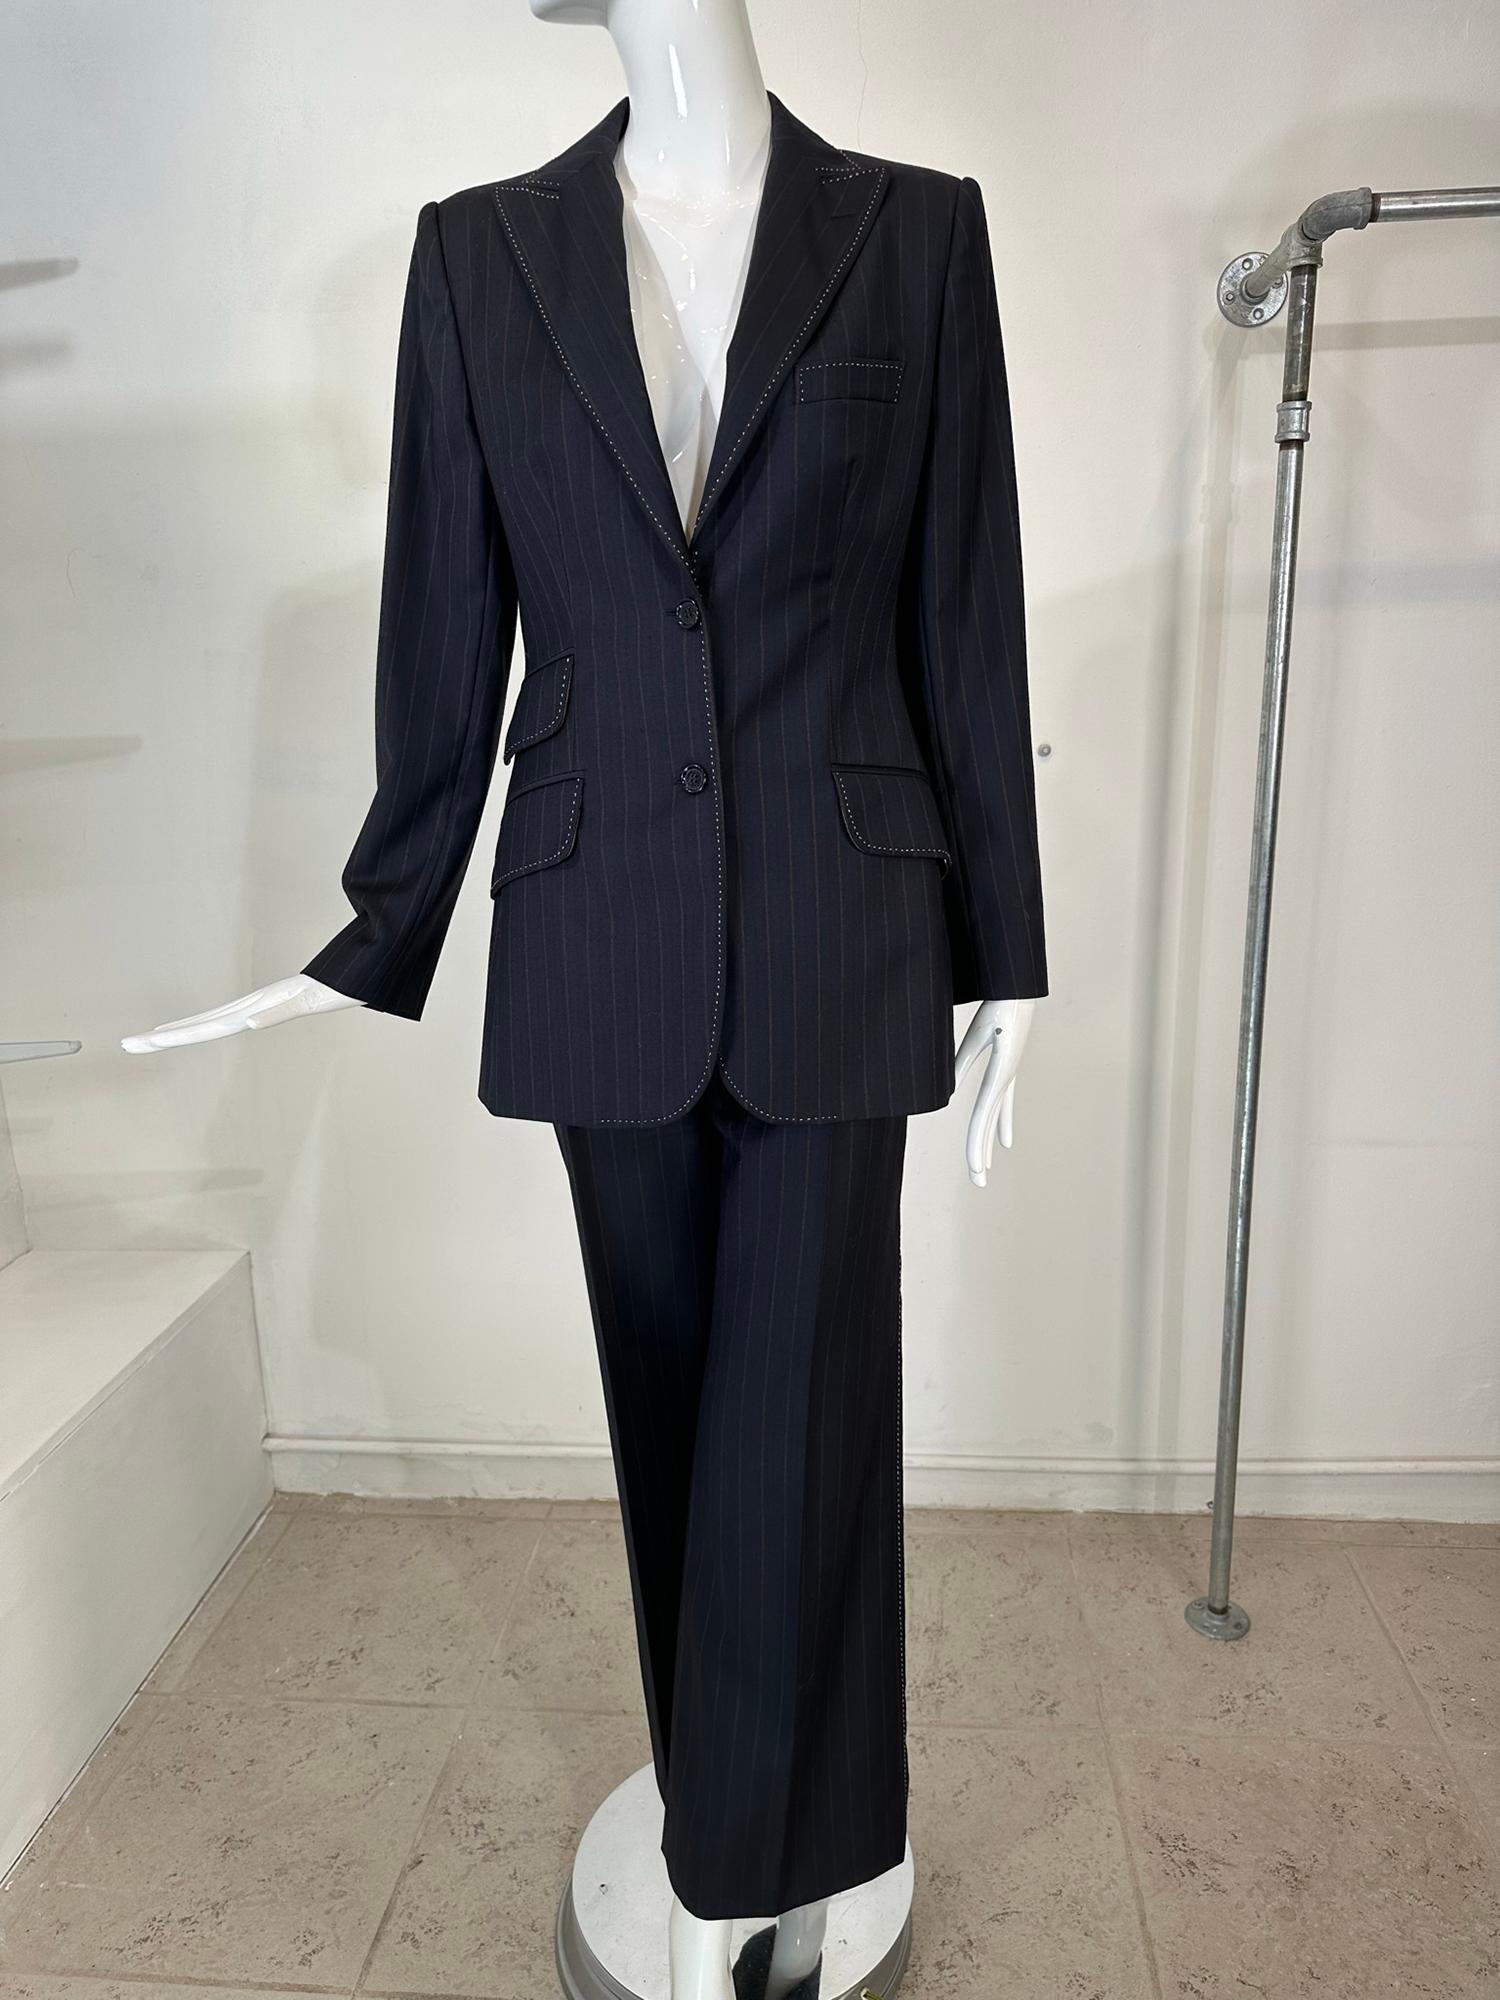 Dolce & Gabanna pin stripe fine wool single breasted jacket & full leg pant suit. This stylish suit features a slim fitting slightly below hip length jacket with with hip front flap pockets 2 on the right & 1 on the left. Deep V neckline with